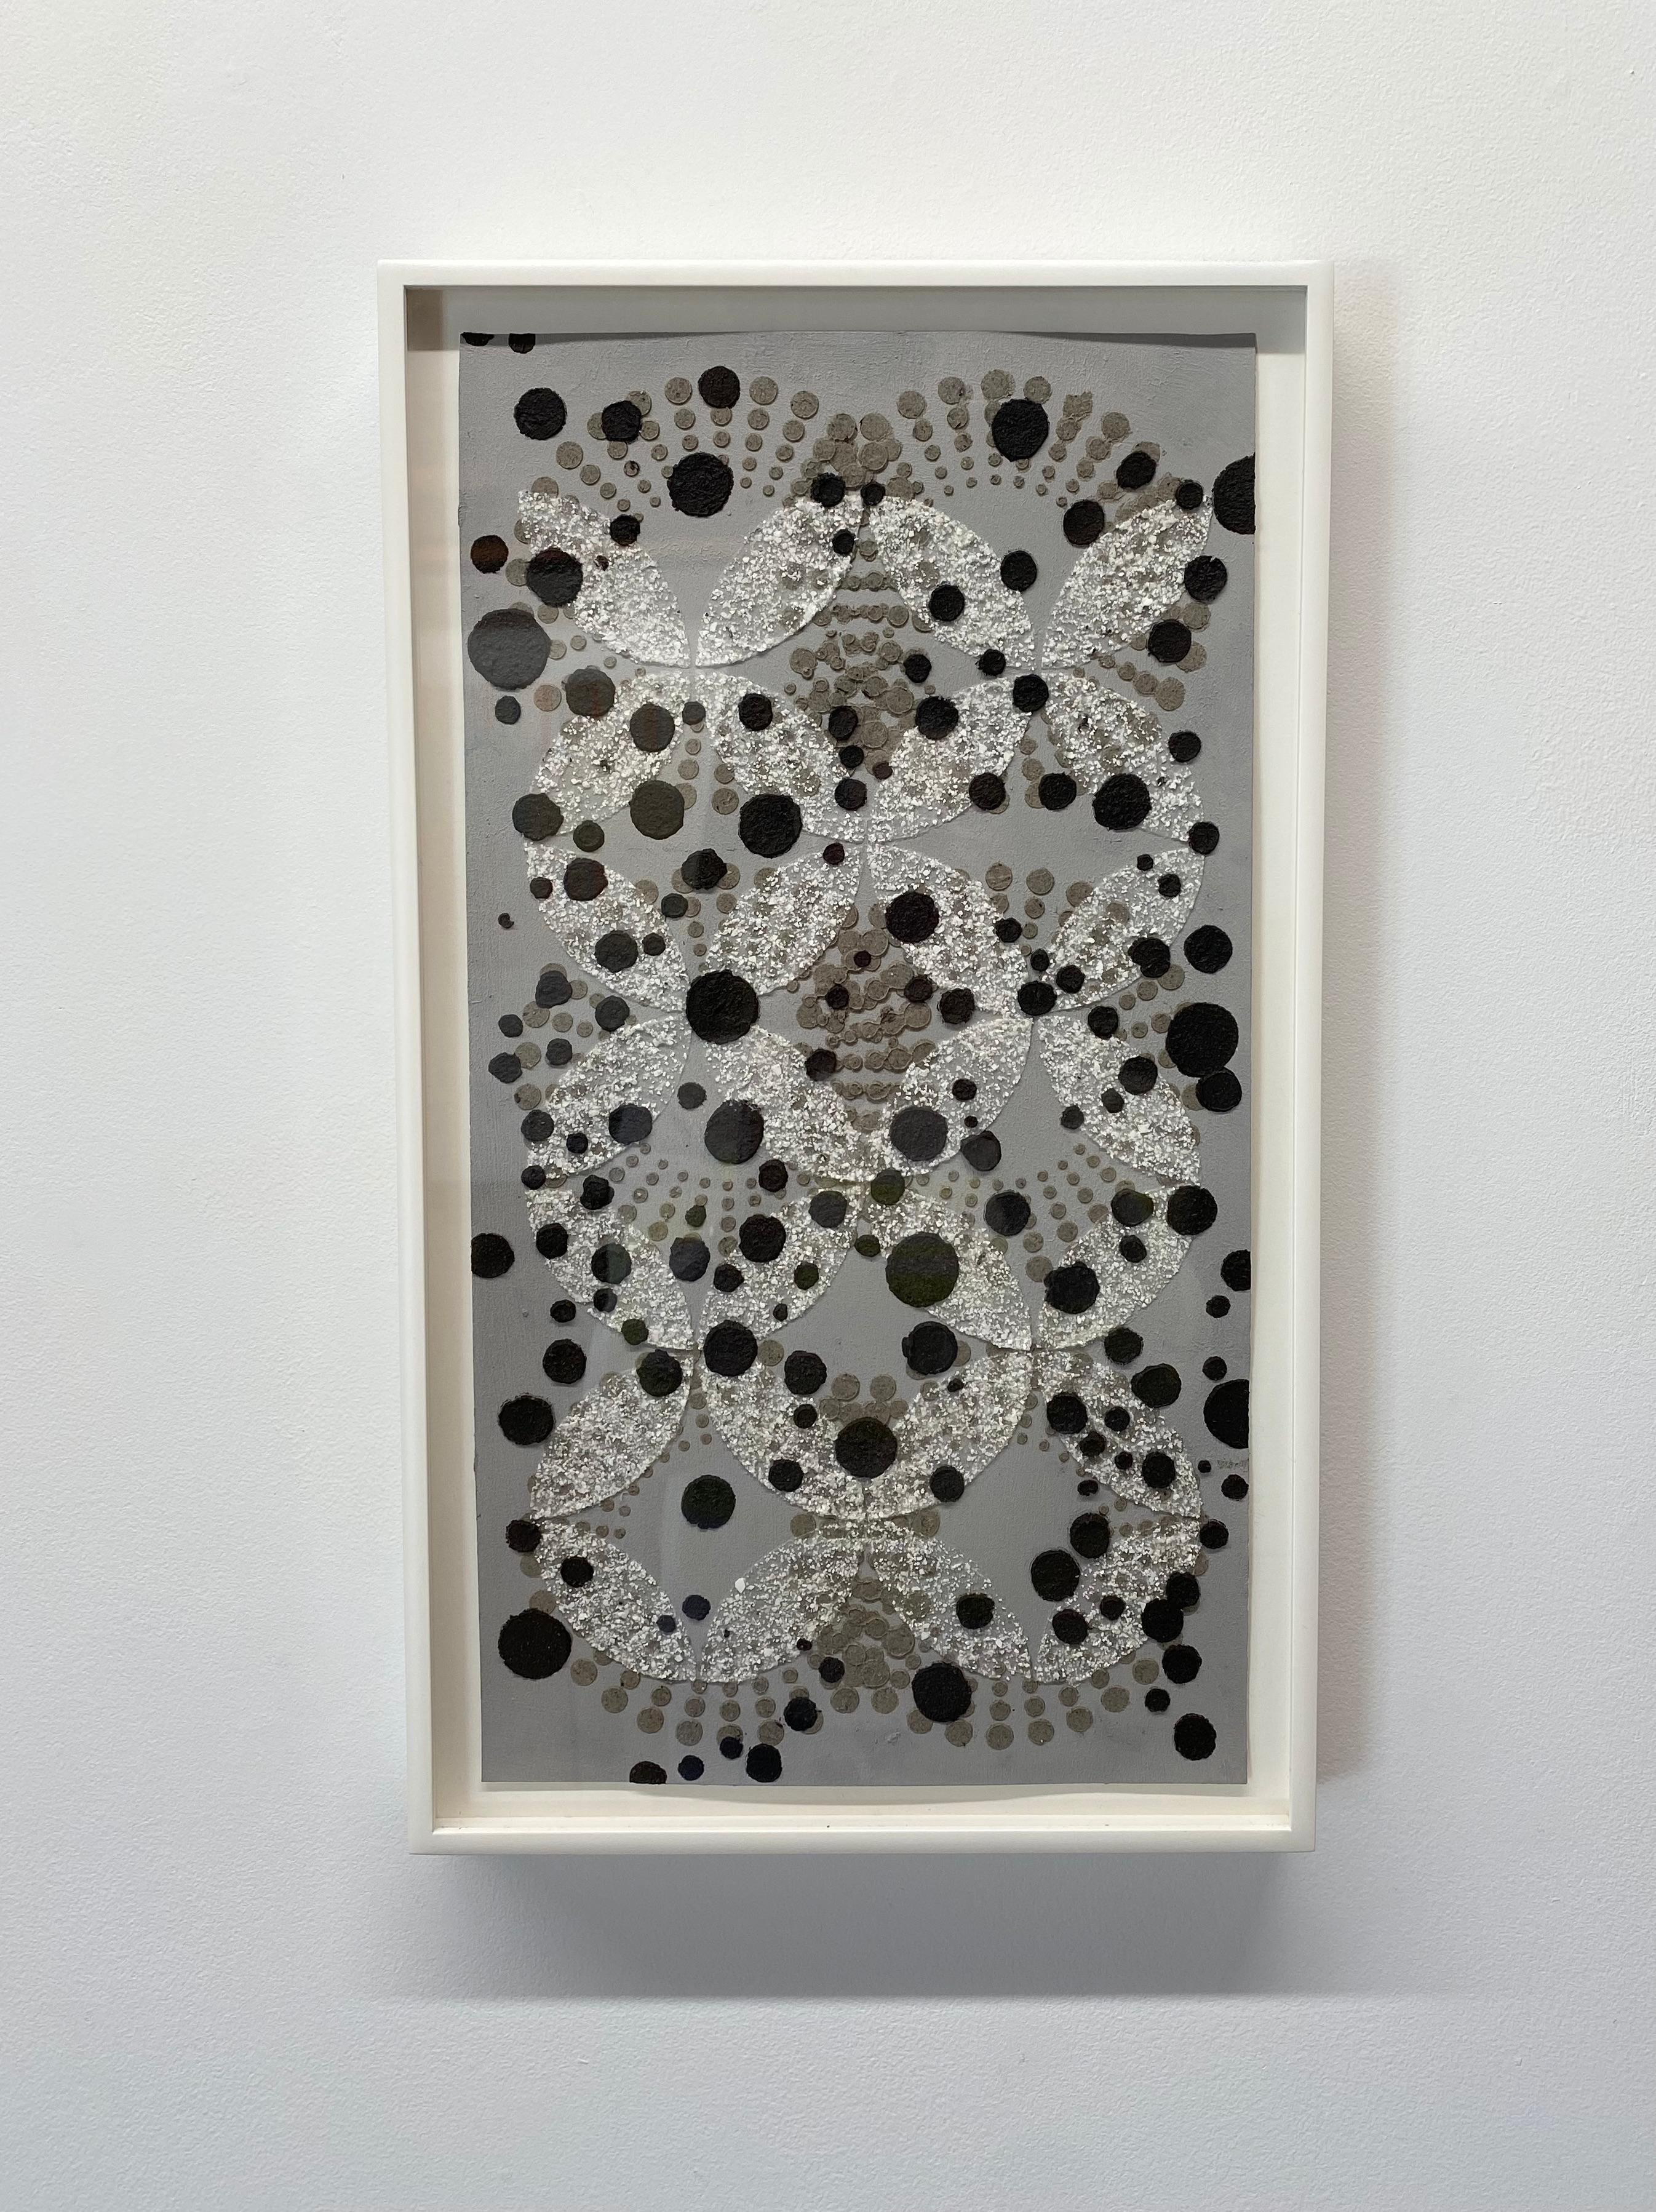 Untitled Black Dots on Two Patterns, Mixed Media, Eggshell, Ash Black on Gray - Contemporary Mixed Media Art by Eleanor White